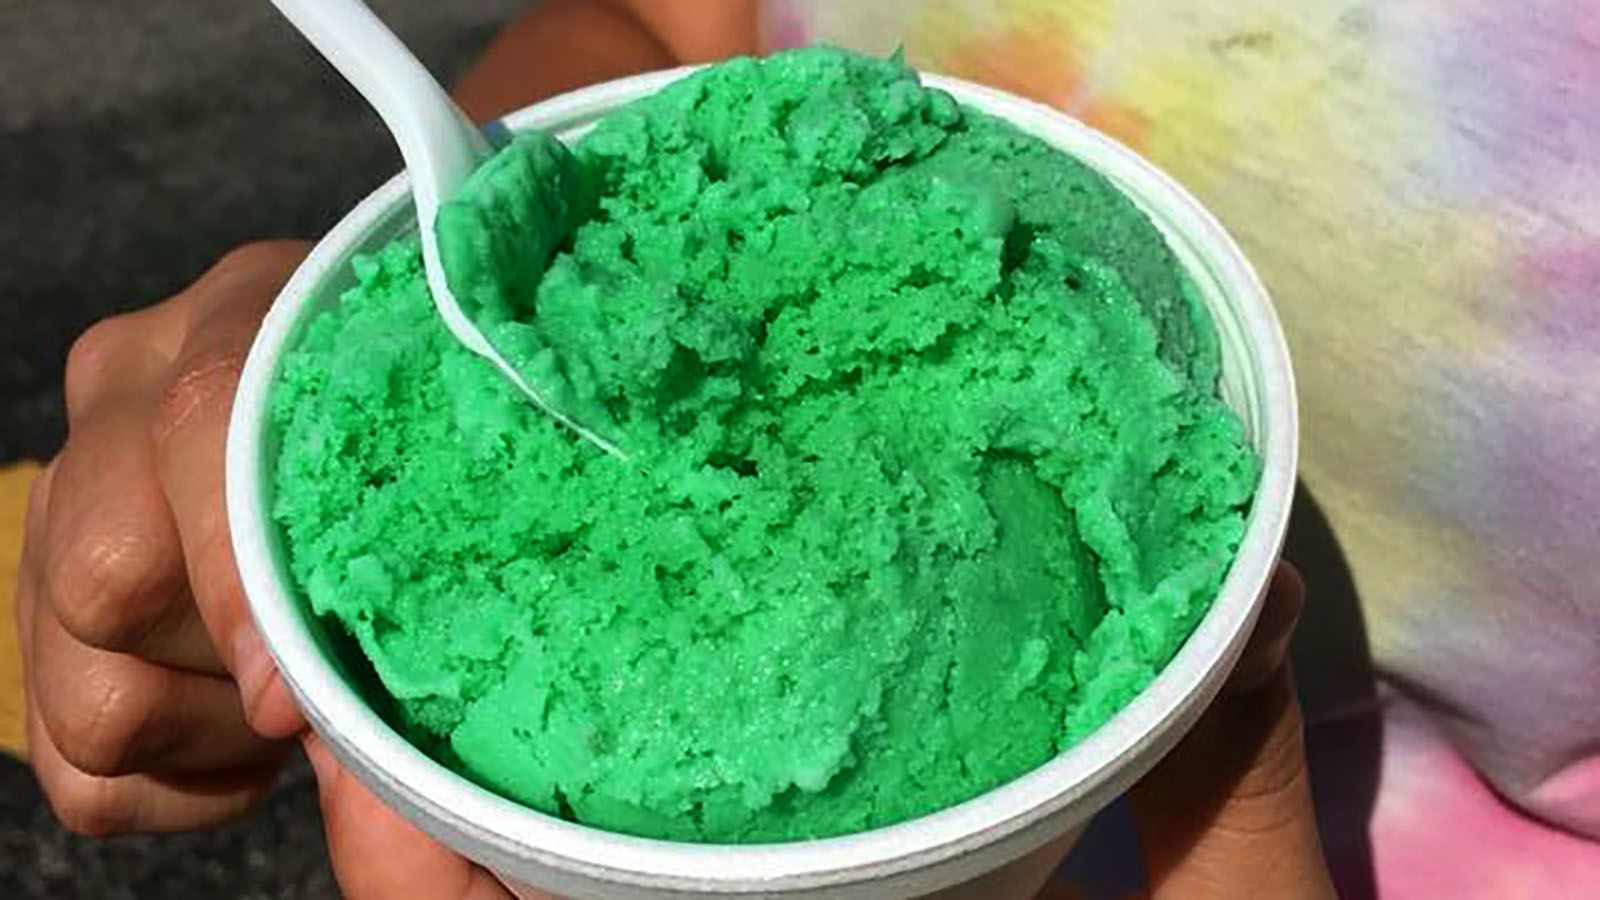 Pickle ice cream is among the attractions at the St. Joe Pickle Festival.